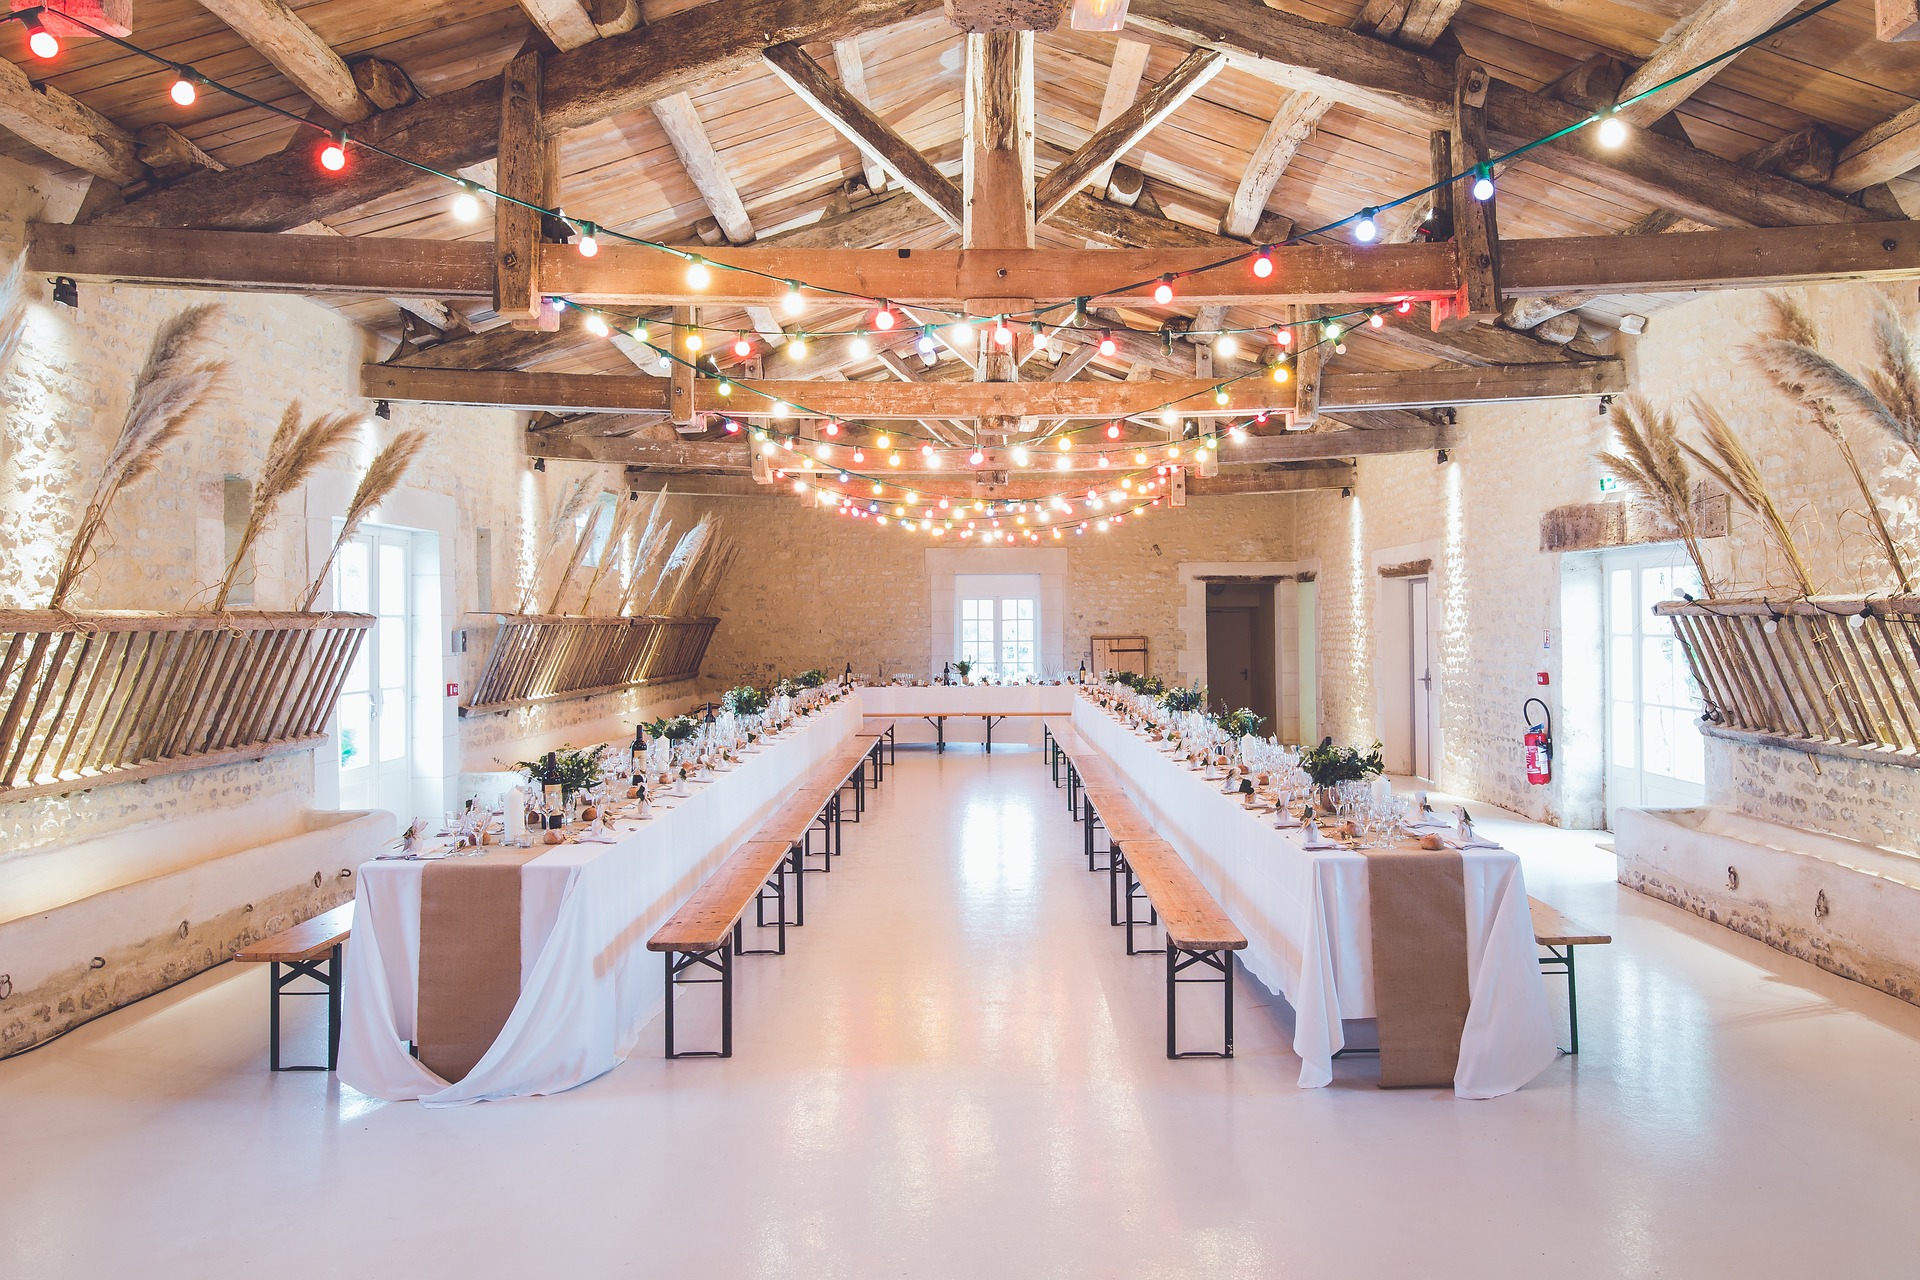 9 Questions You NEED To Ask Before Booking Your Wedding Venue